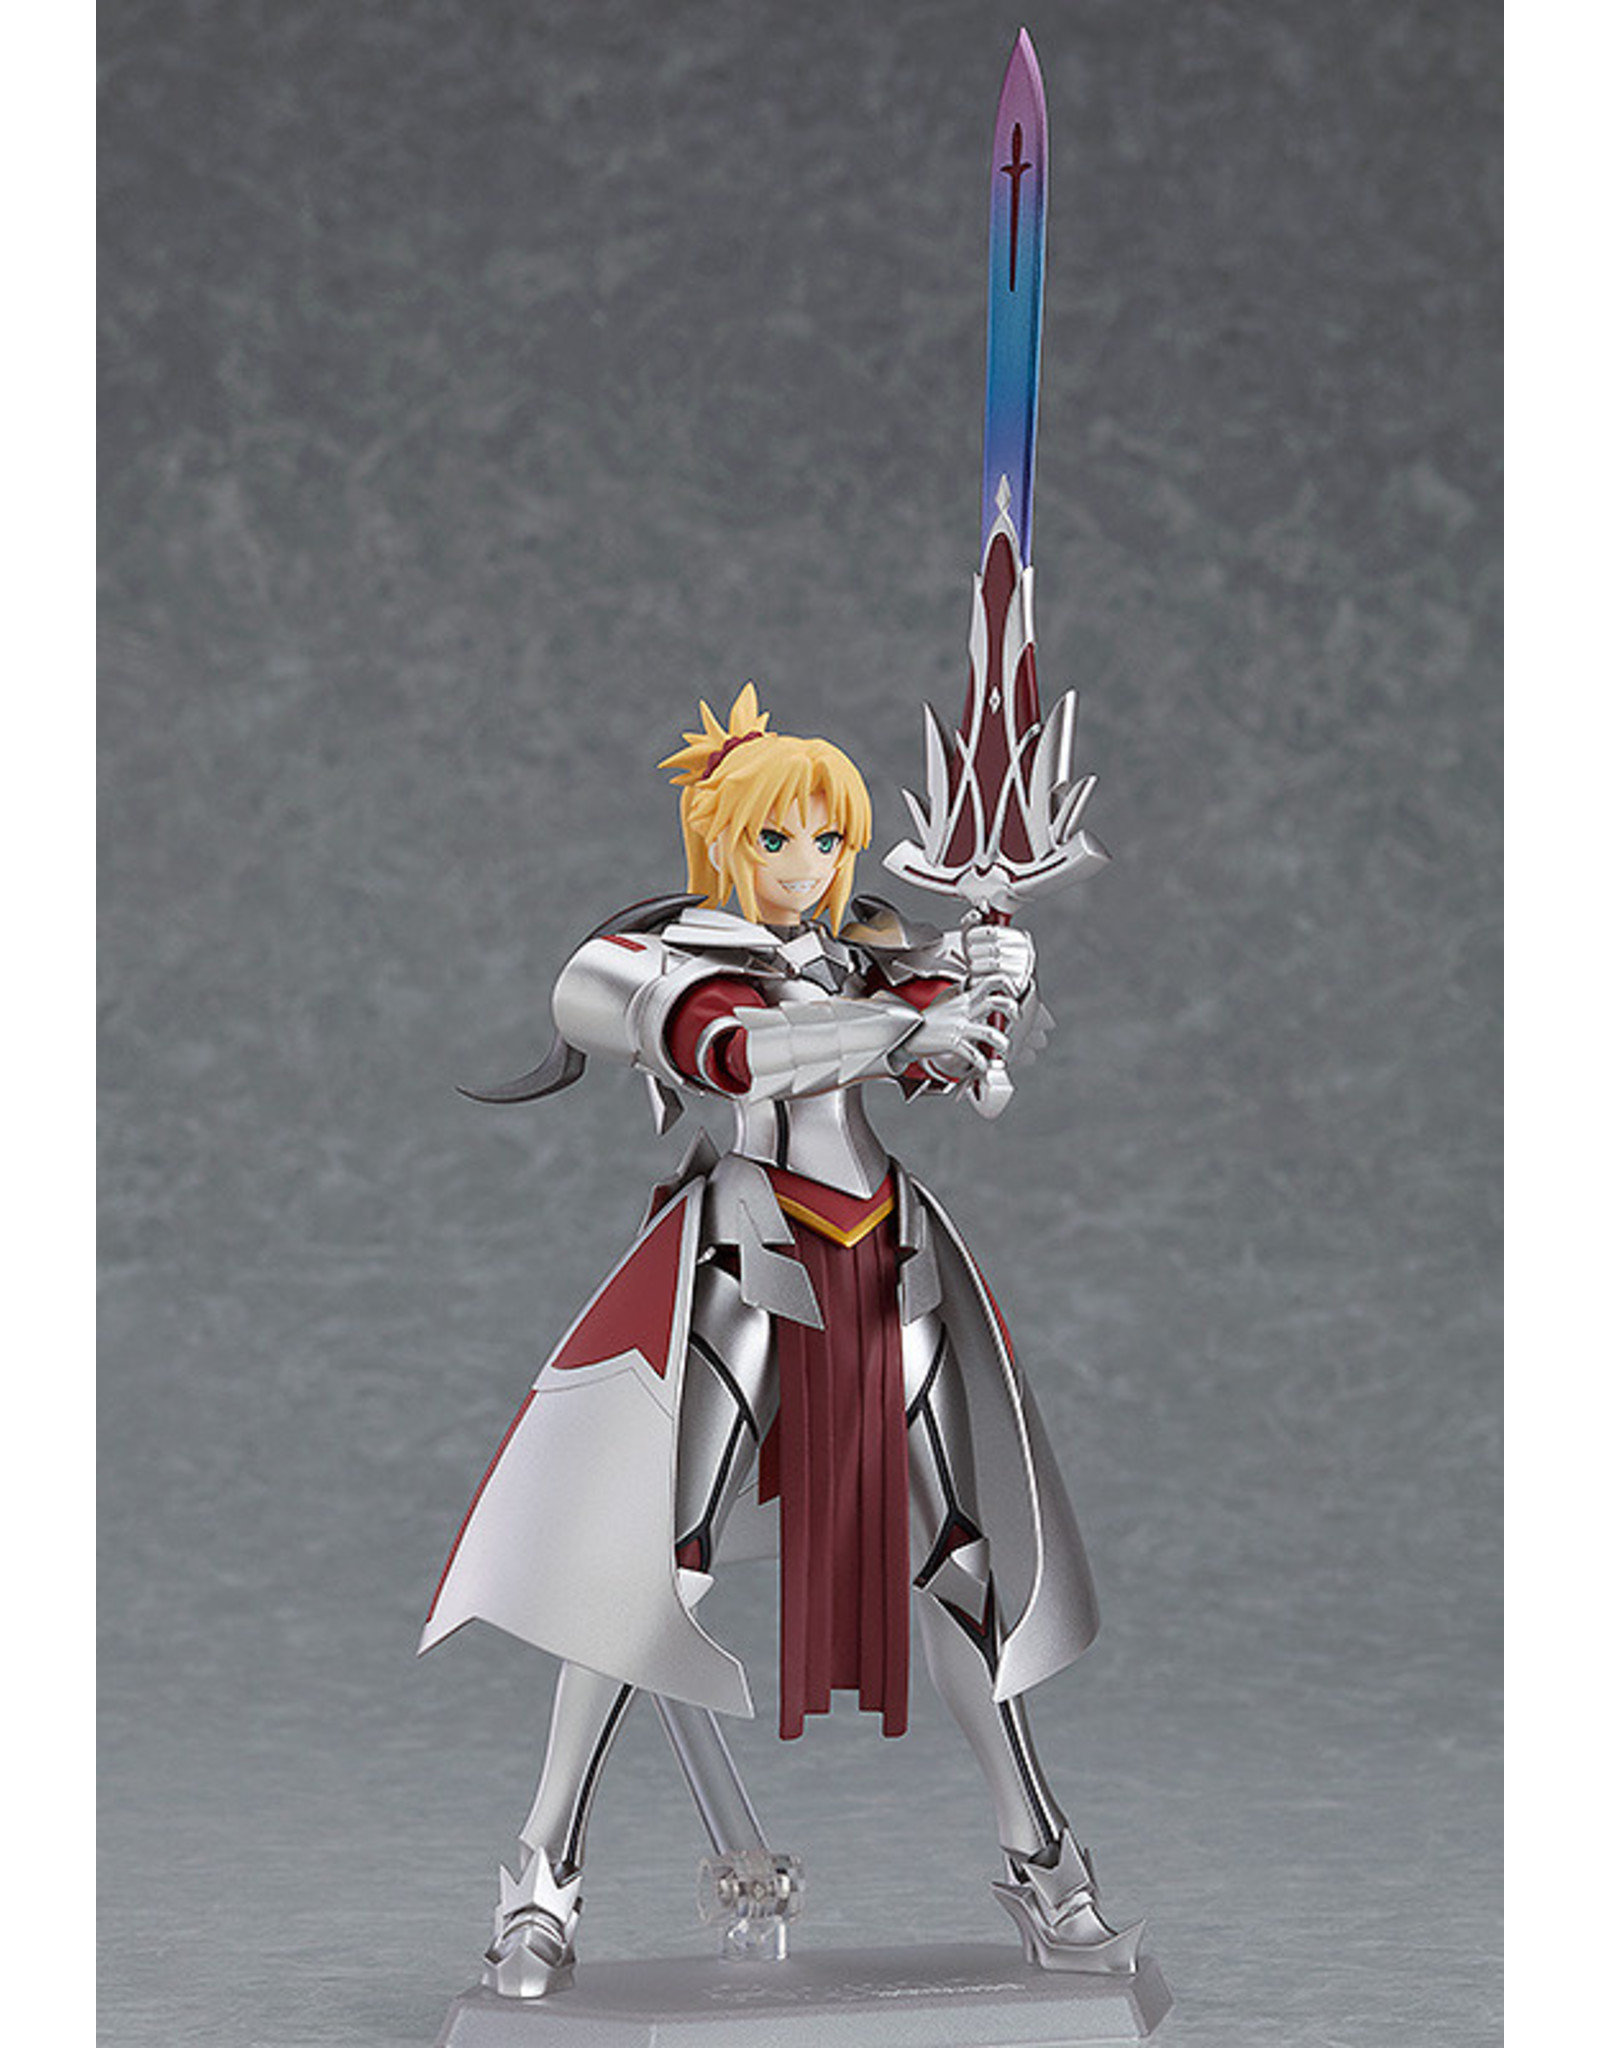 Figma #414 Saber of "Red"